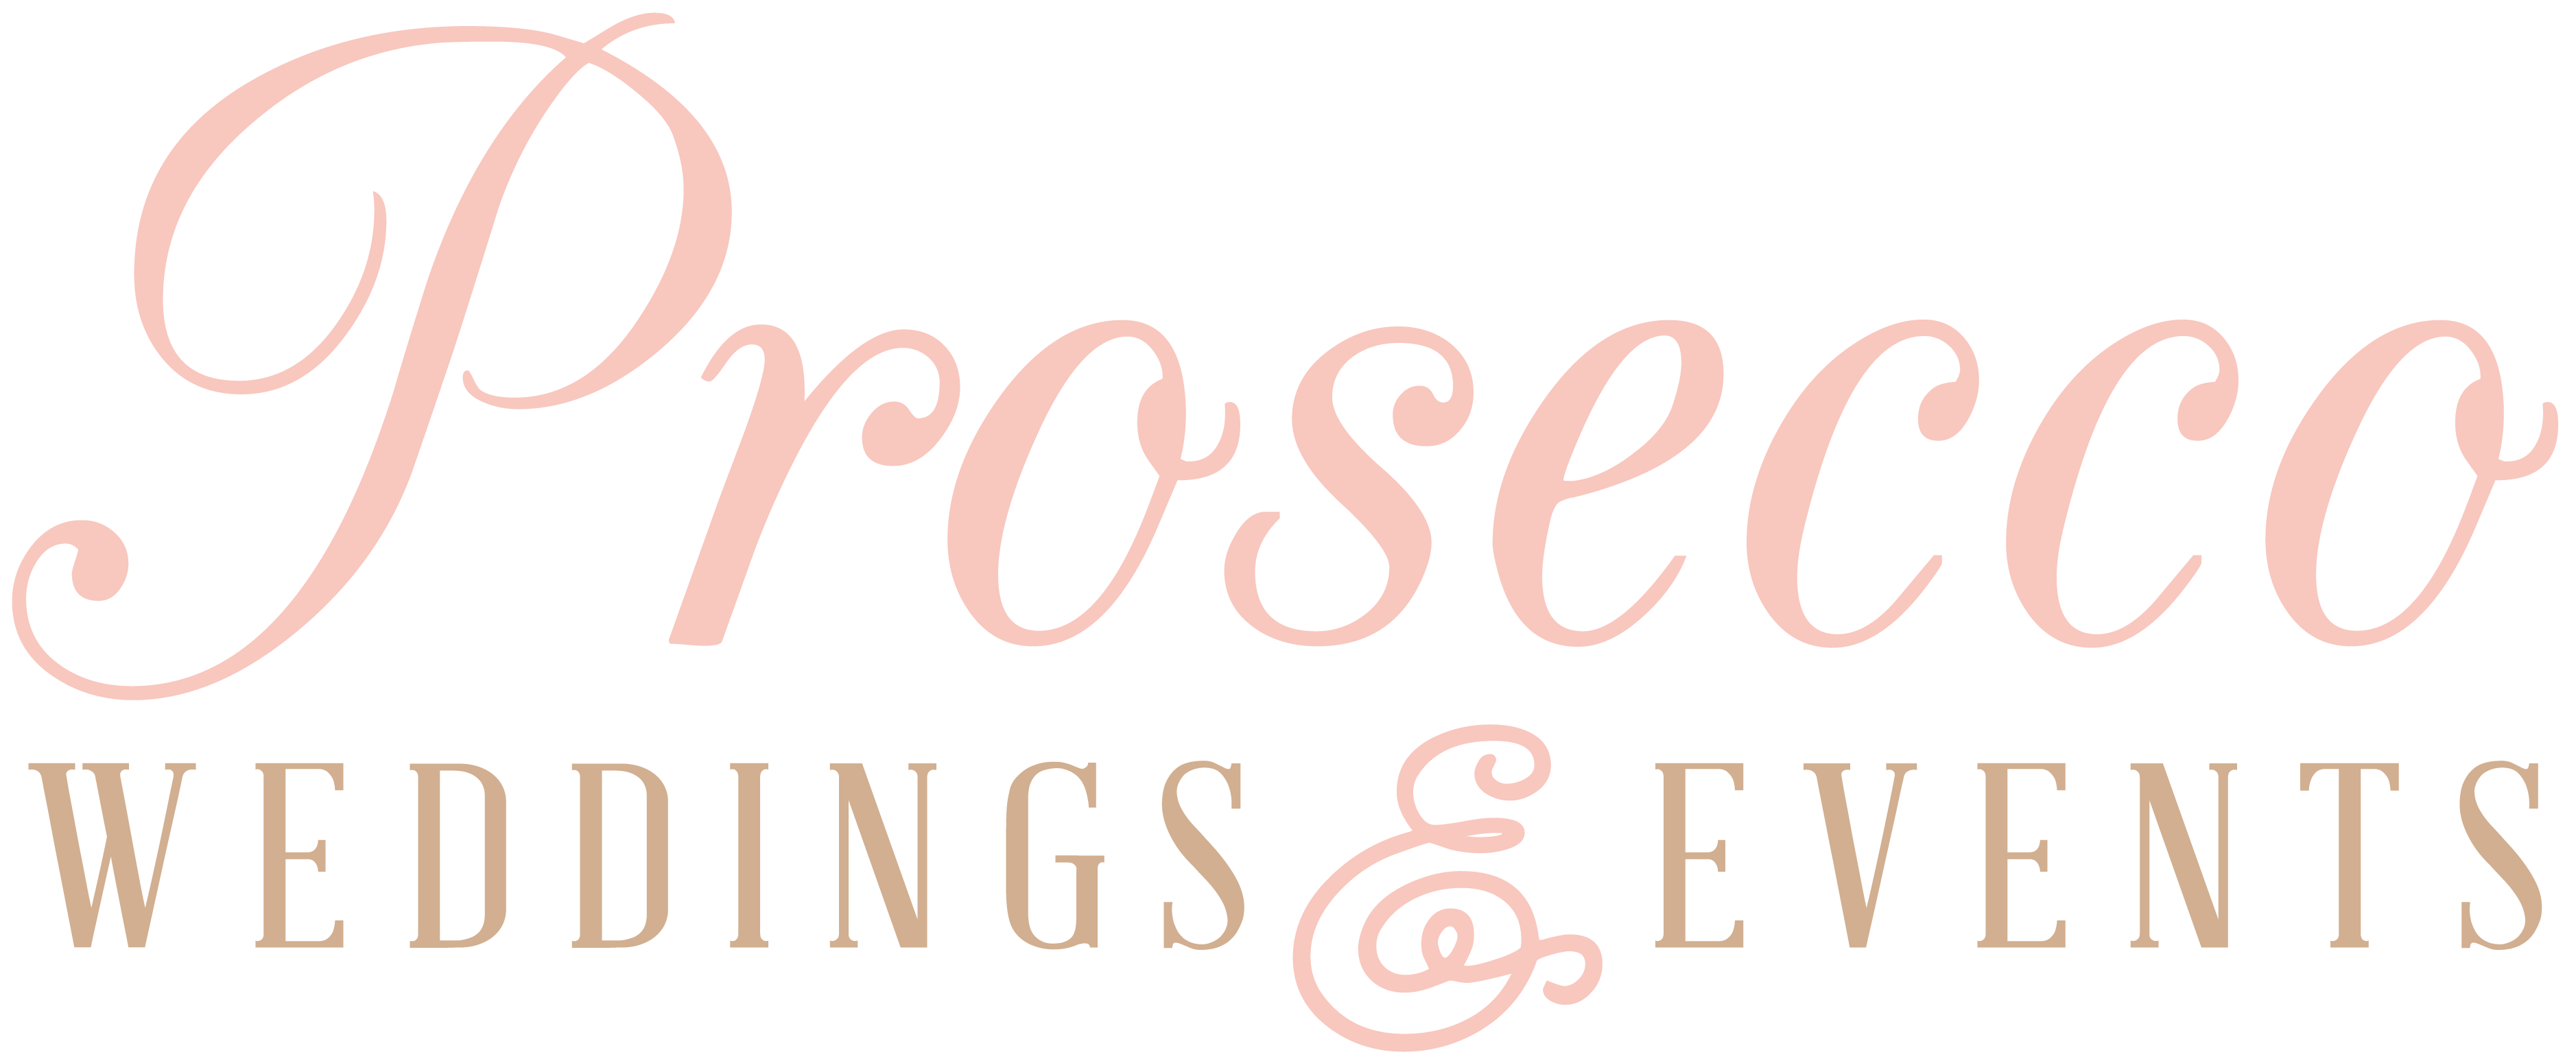 Prosecco Weddings and Events